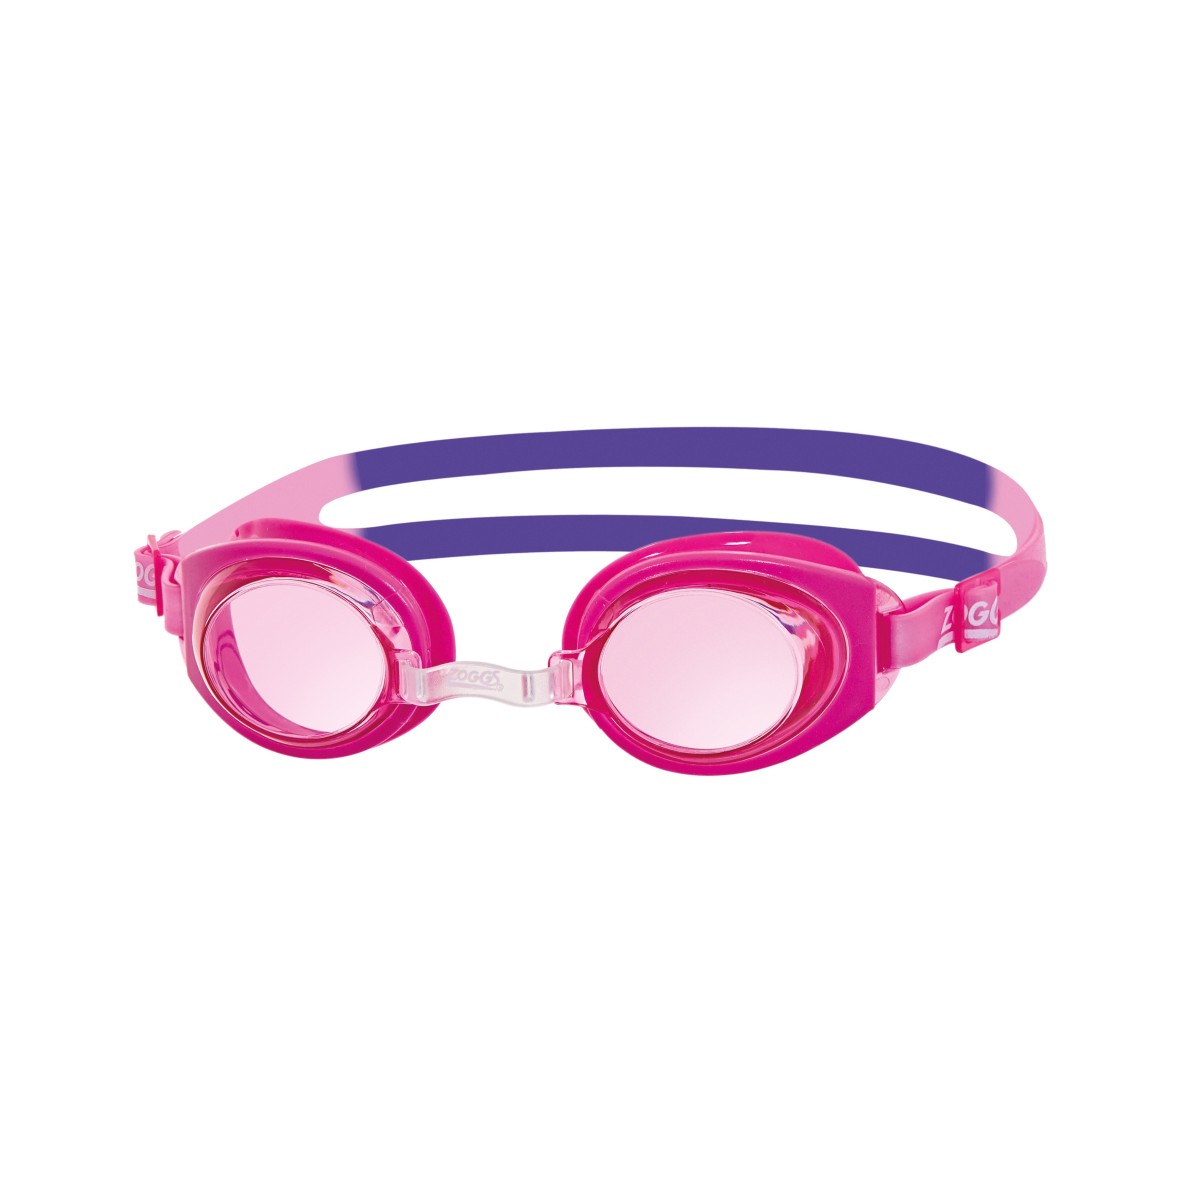 SWIMMING GOGGLES LITTLE RIPPER PINK ZOGGS - view 1